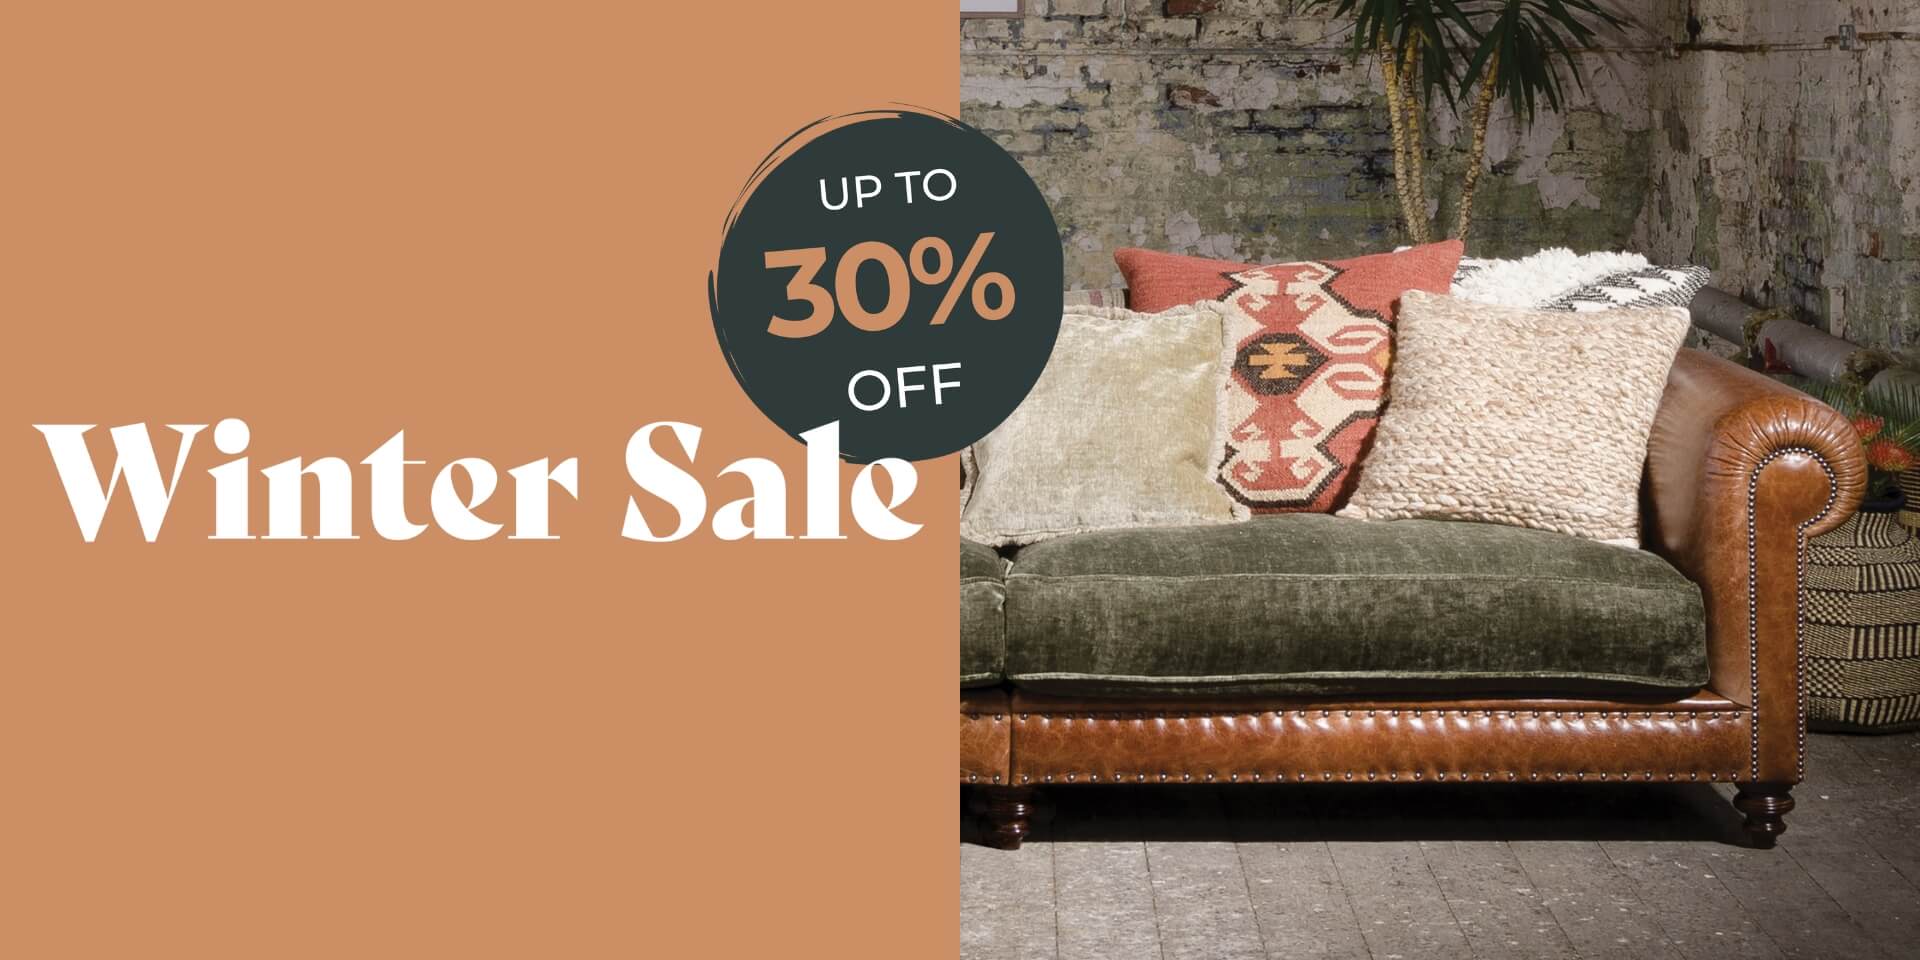 Winter Sale - Save Up To 30% Off